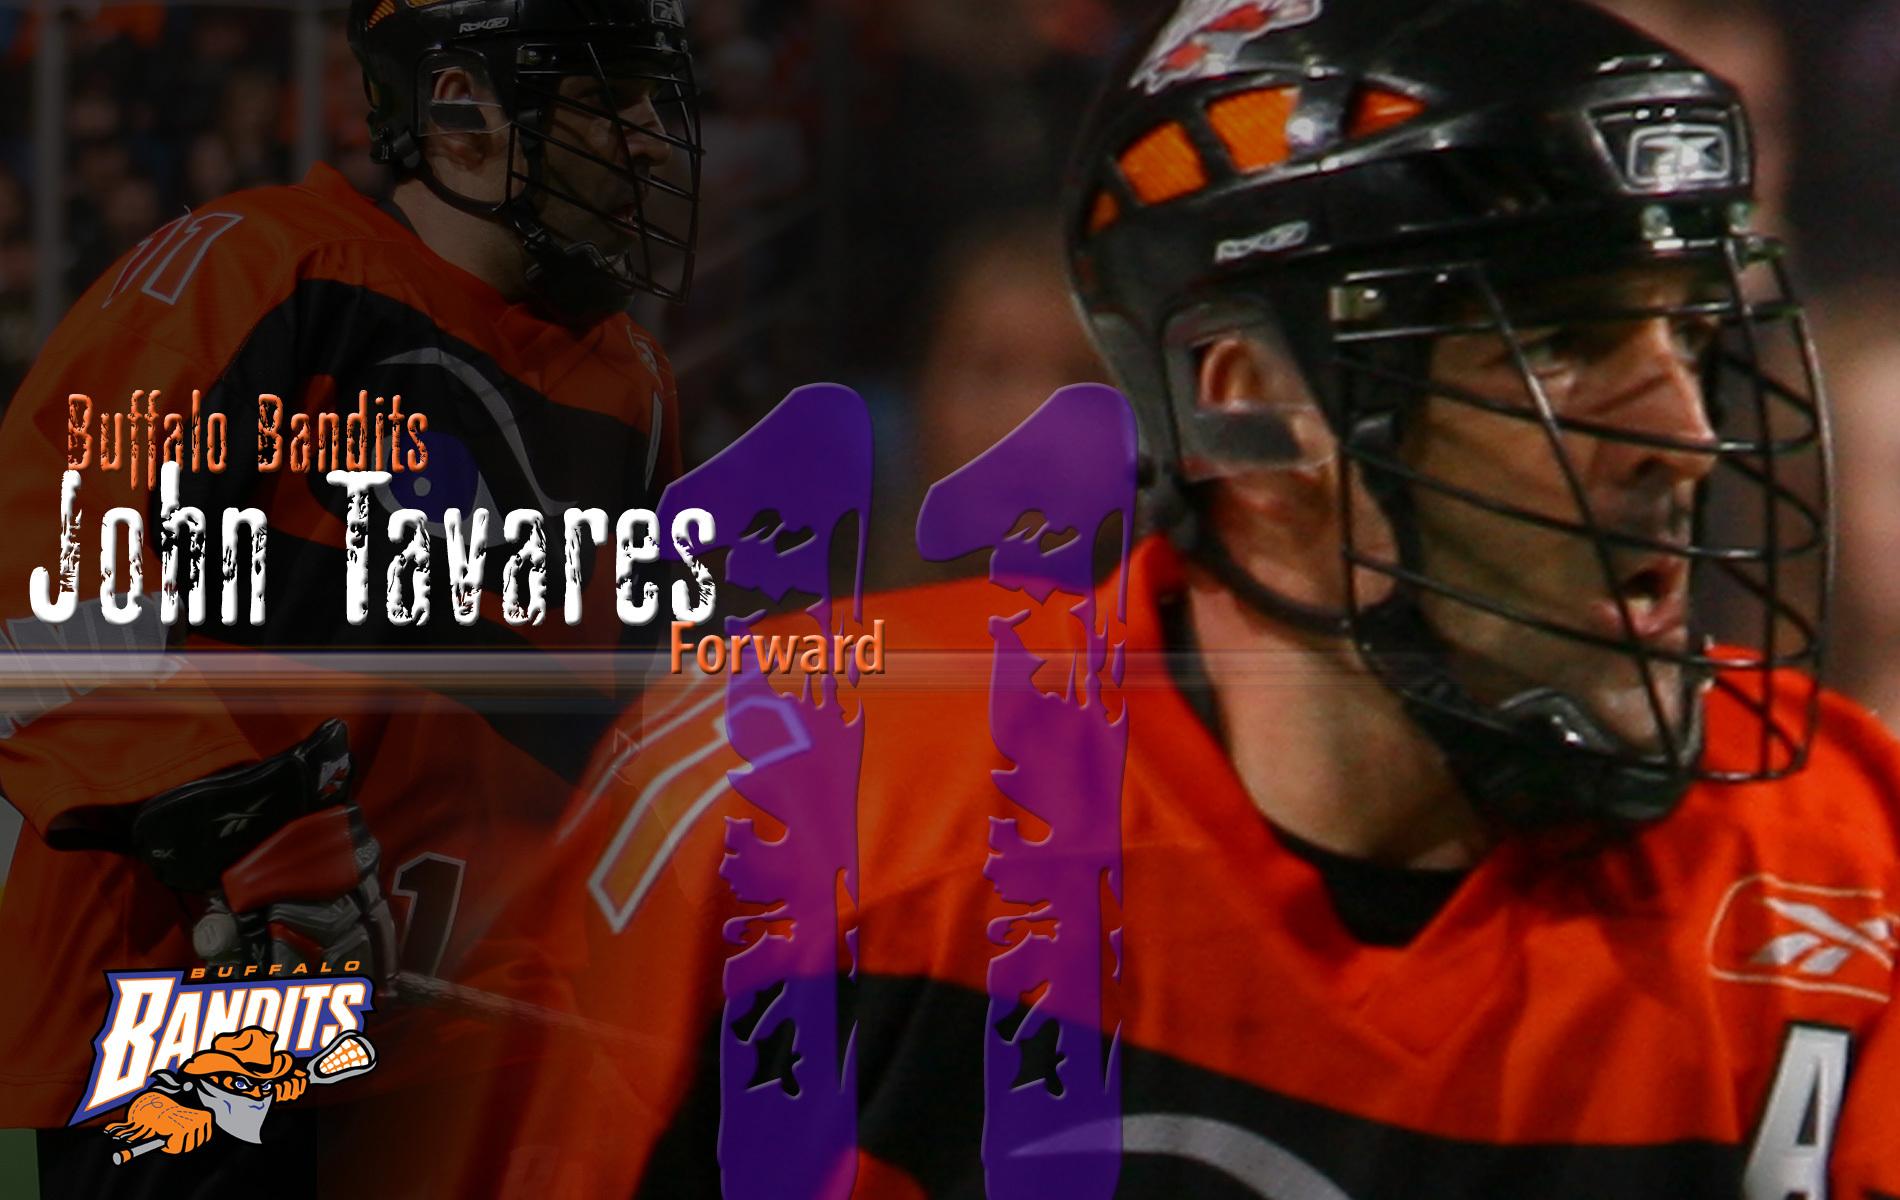 John Tavares the player wallpaper and image, picture